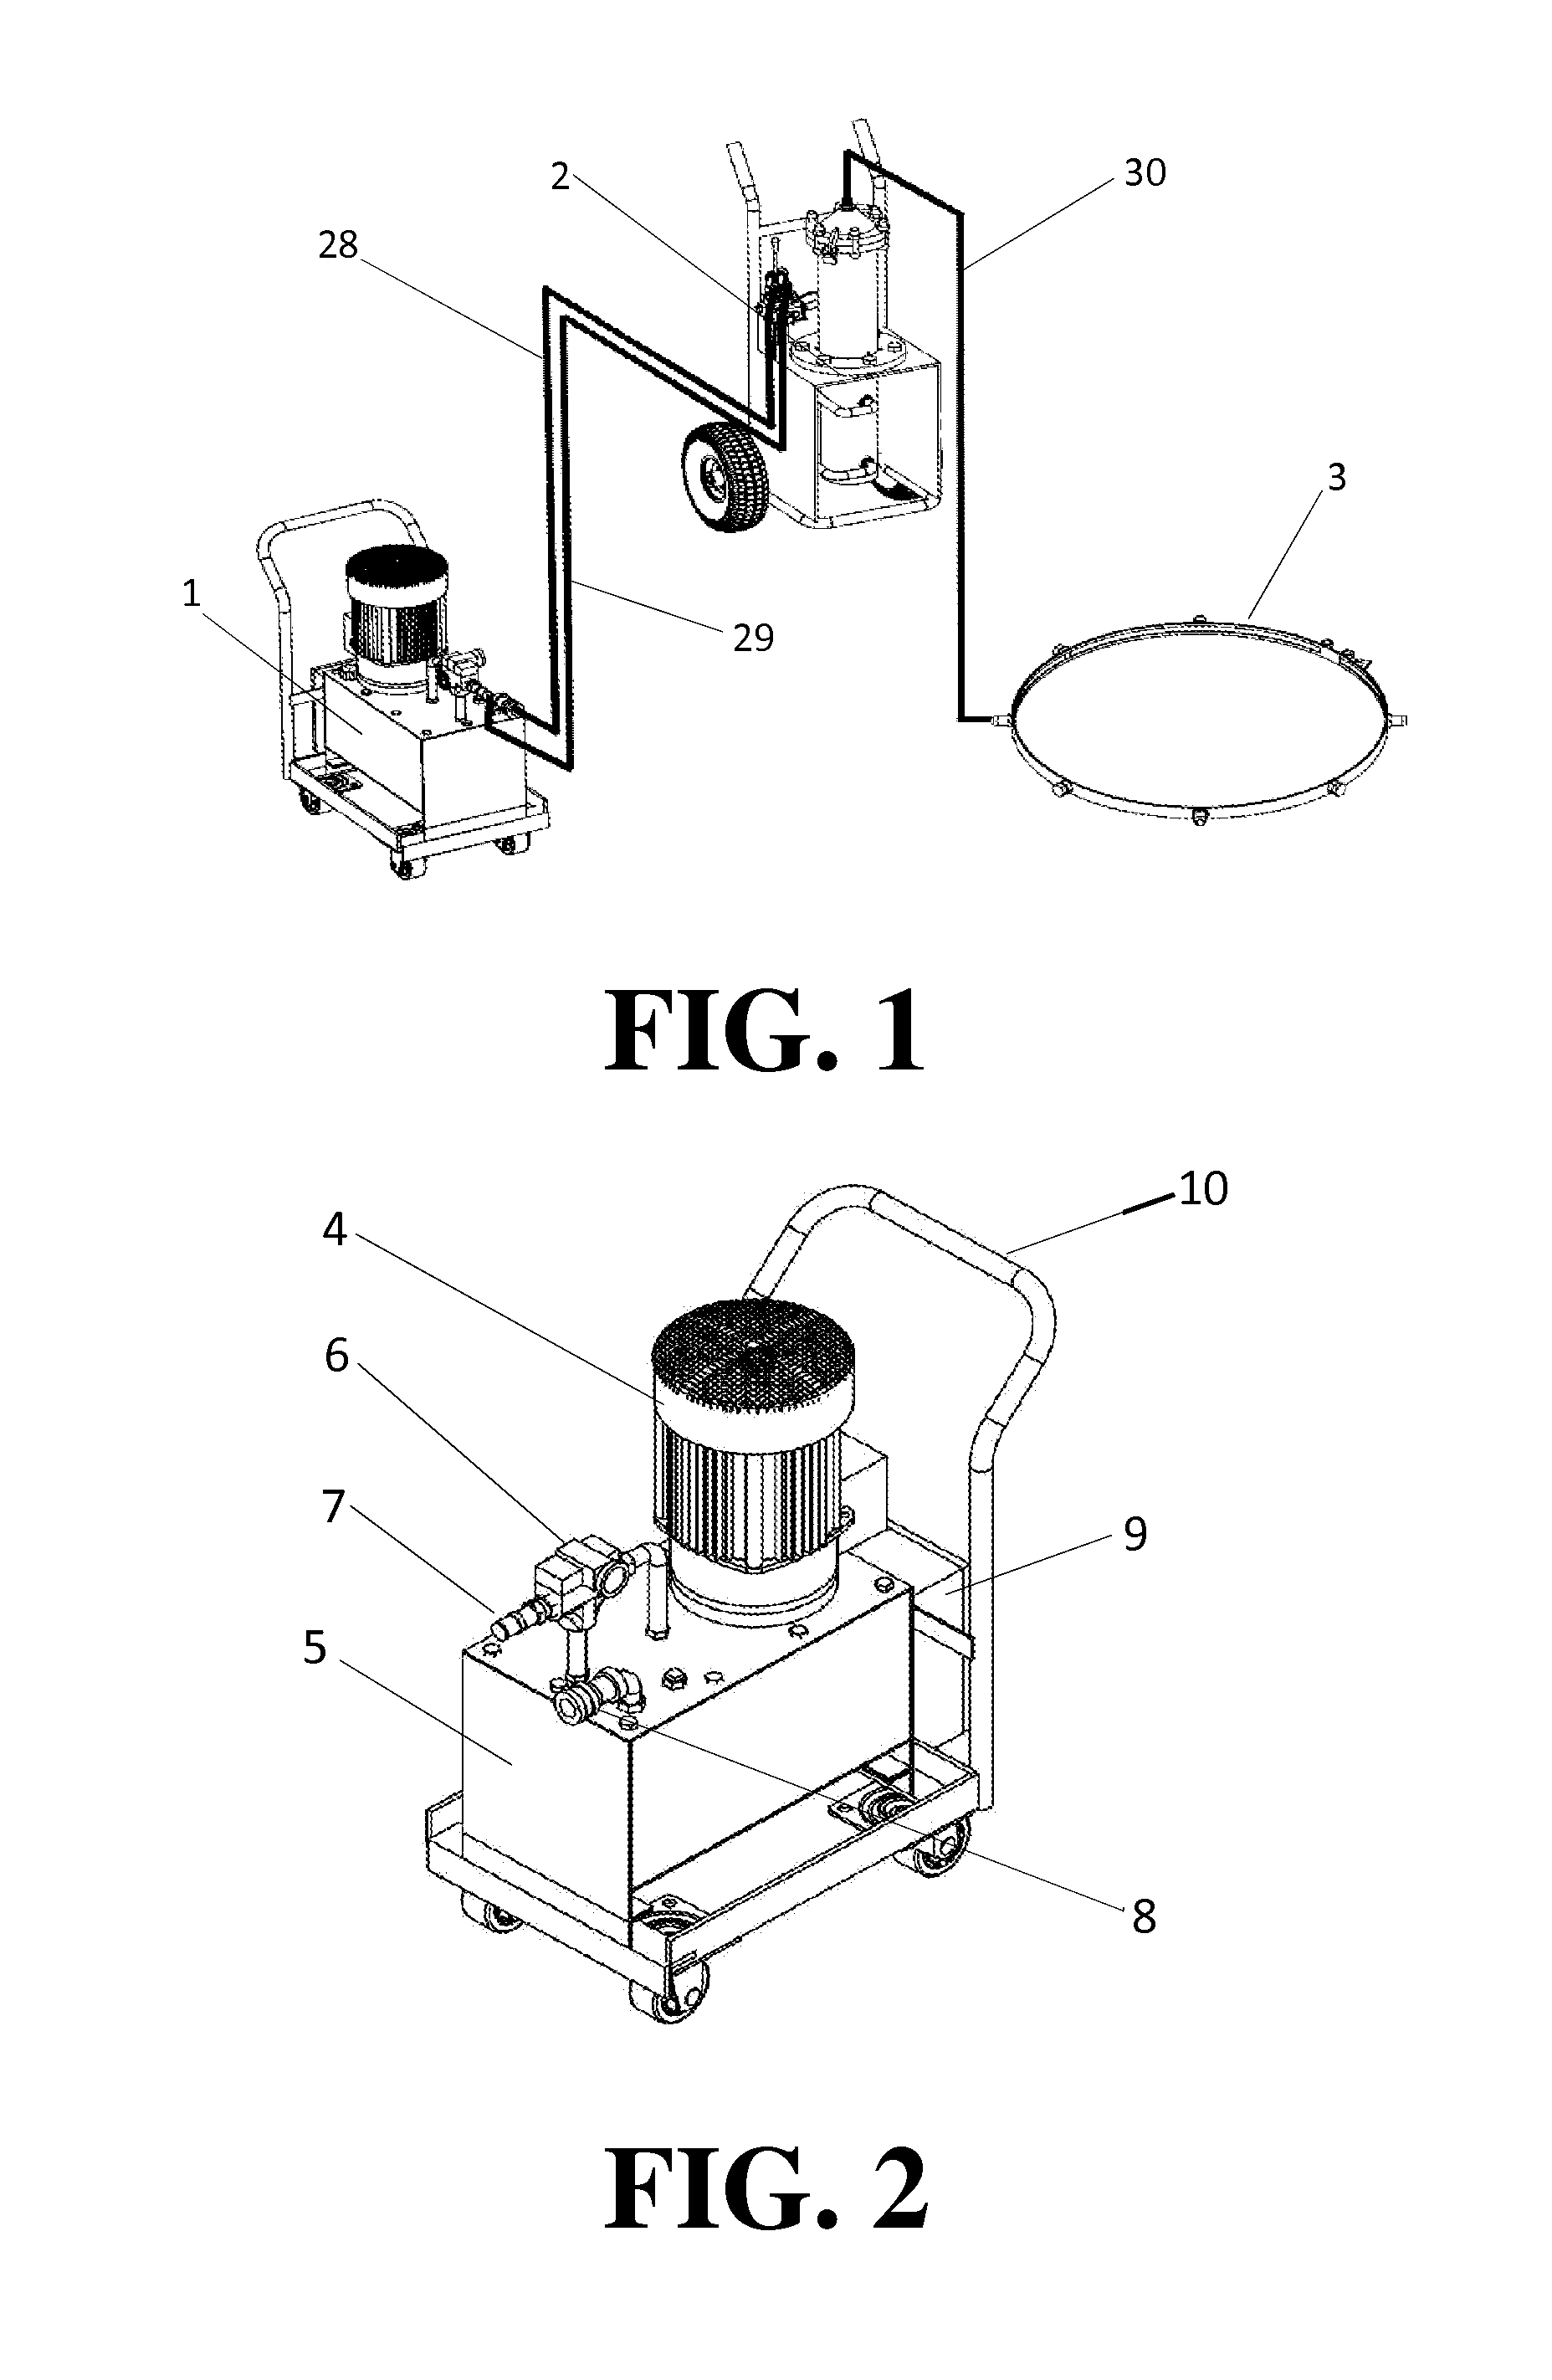 Sealing apparatus for applying corrosion prevention compound in the gap between pipe flanges without using heat